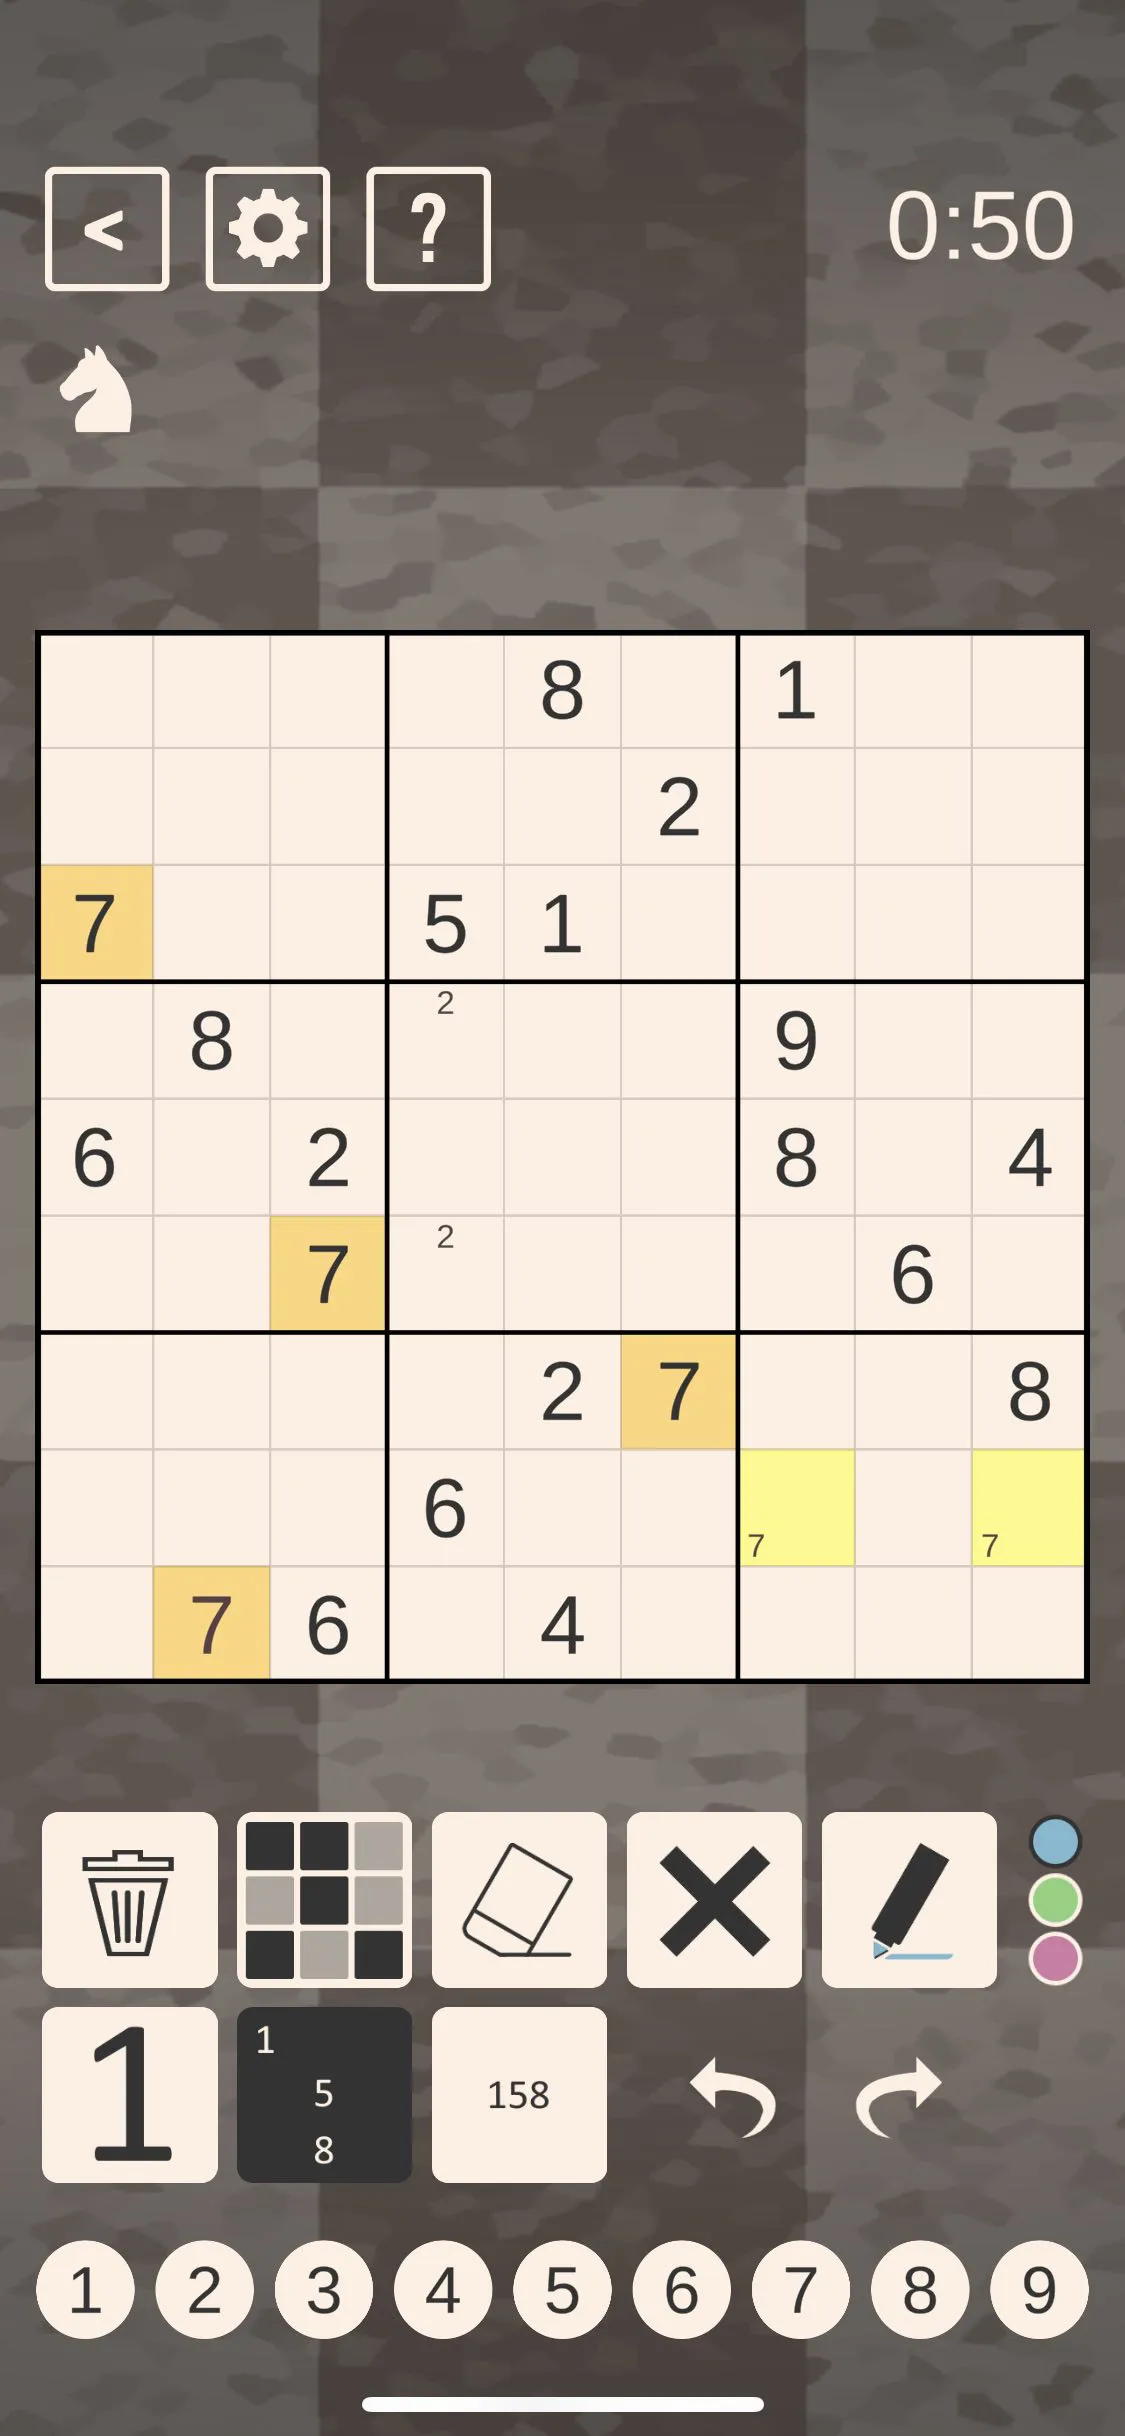 The 7 is highlighted. Squares with 7s are orange and squares with the 7 noted are yellow.